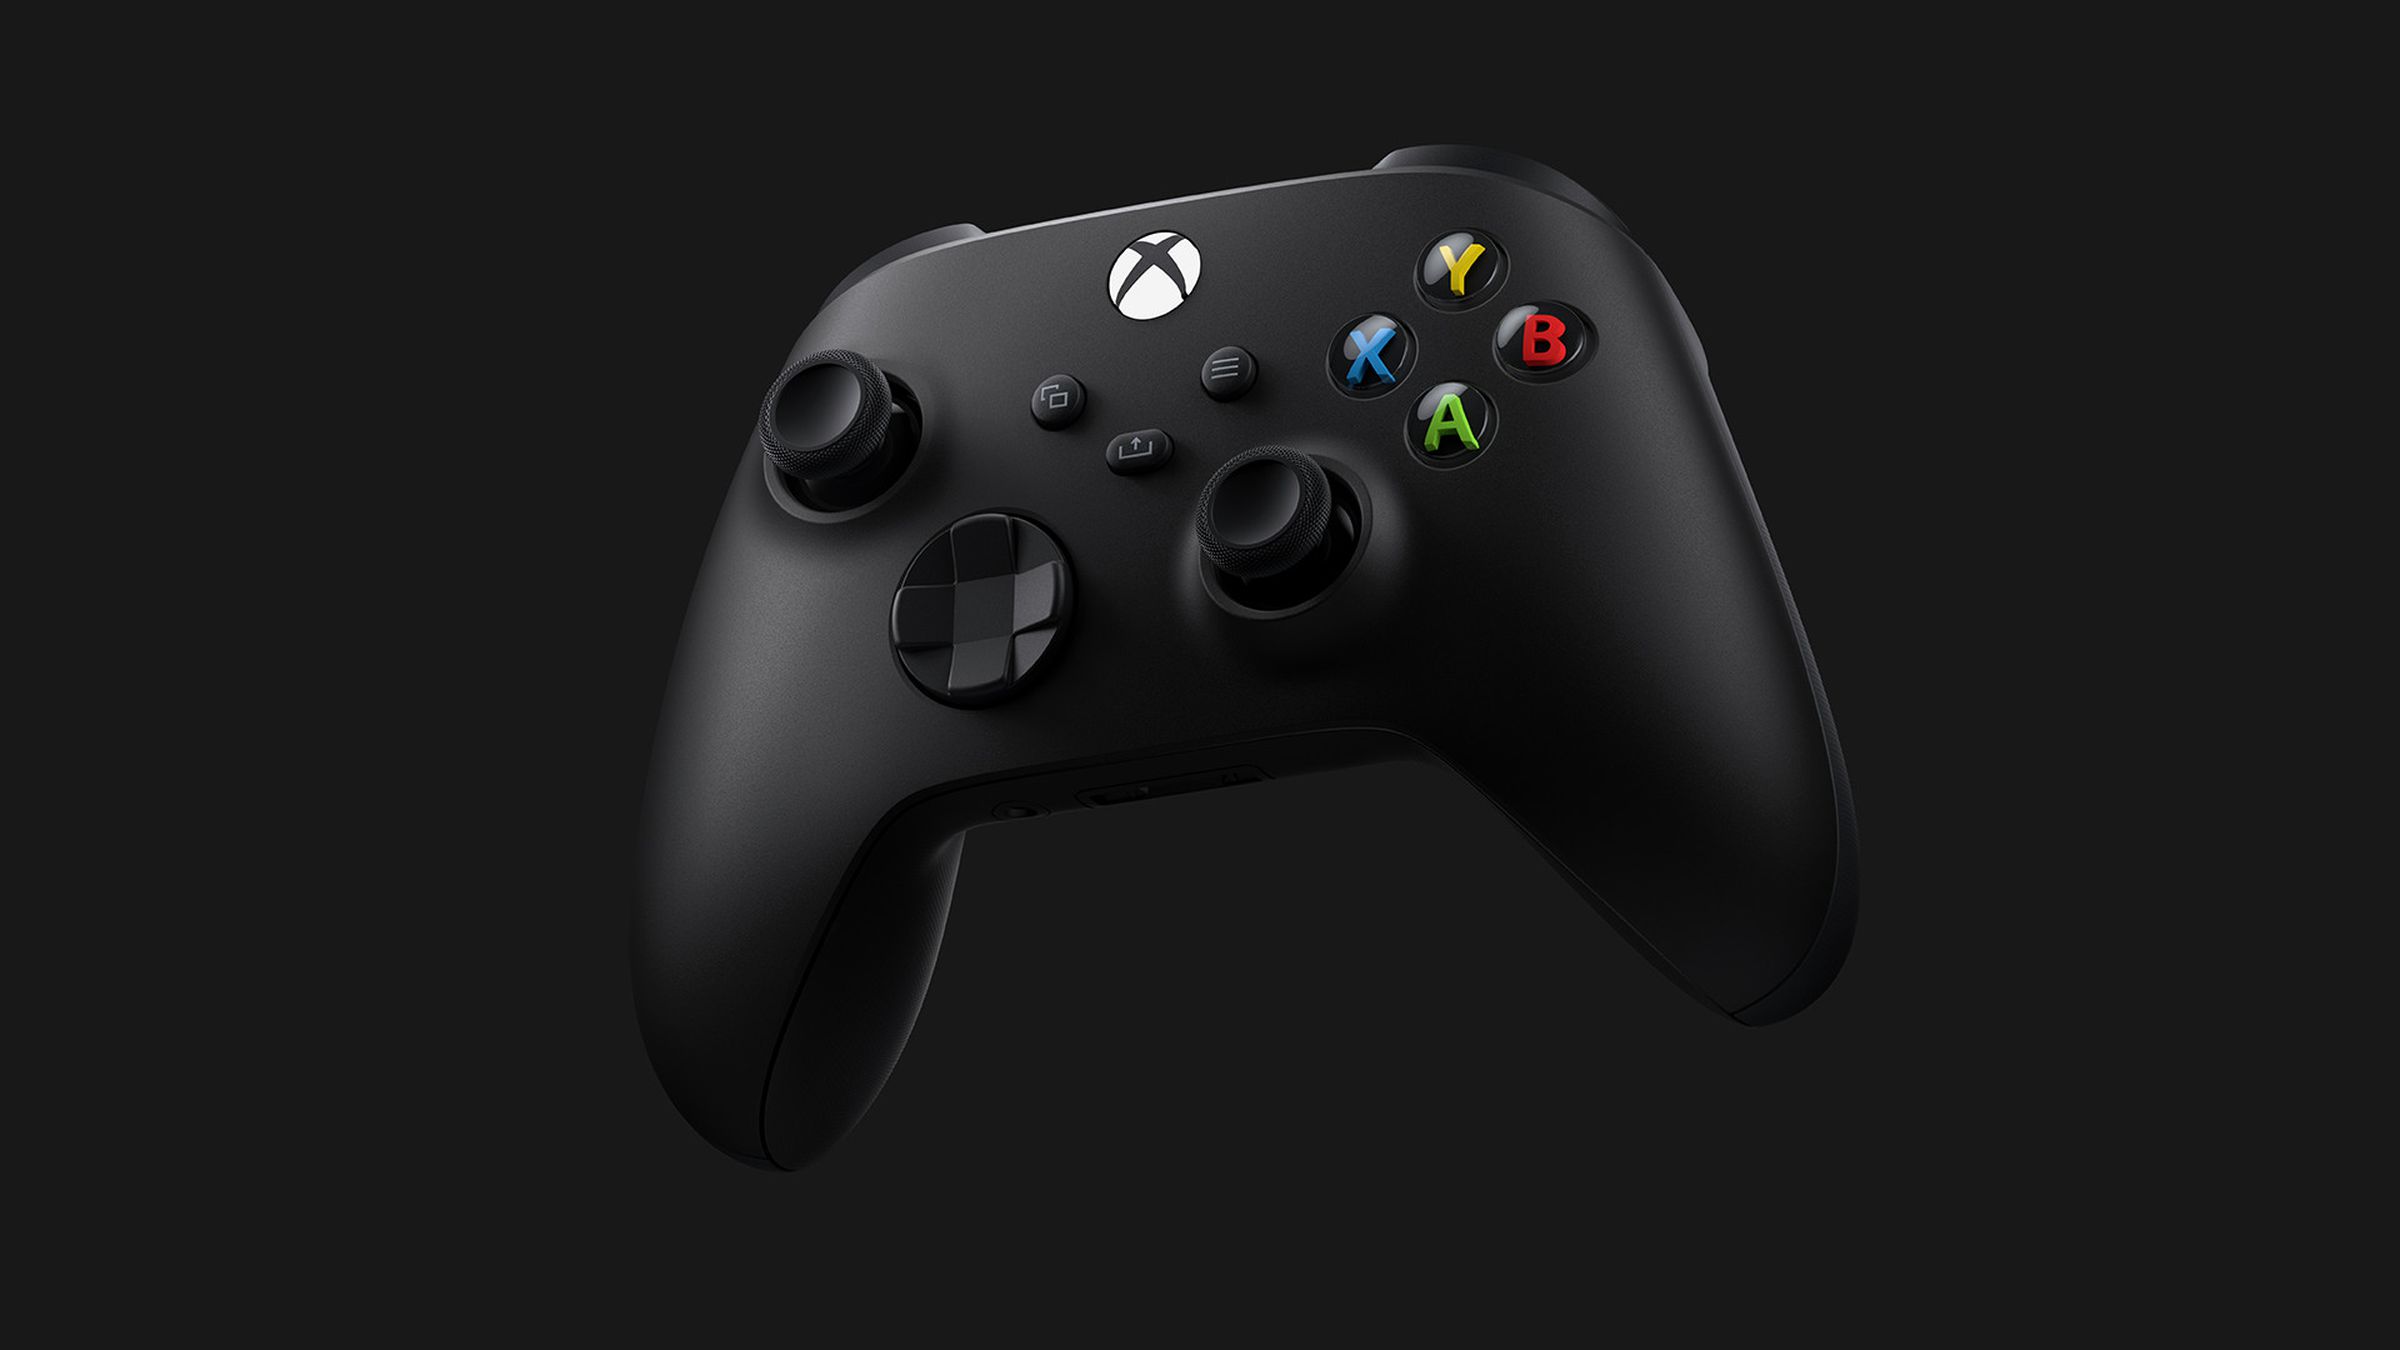 The black version of the Xbox Series X controller.